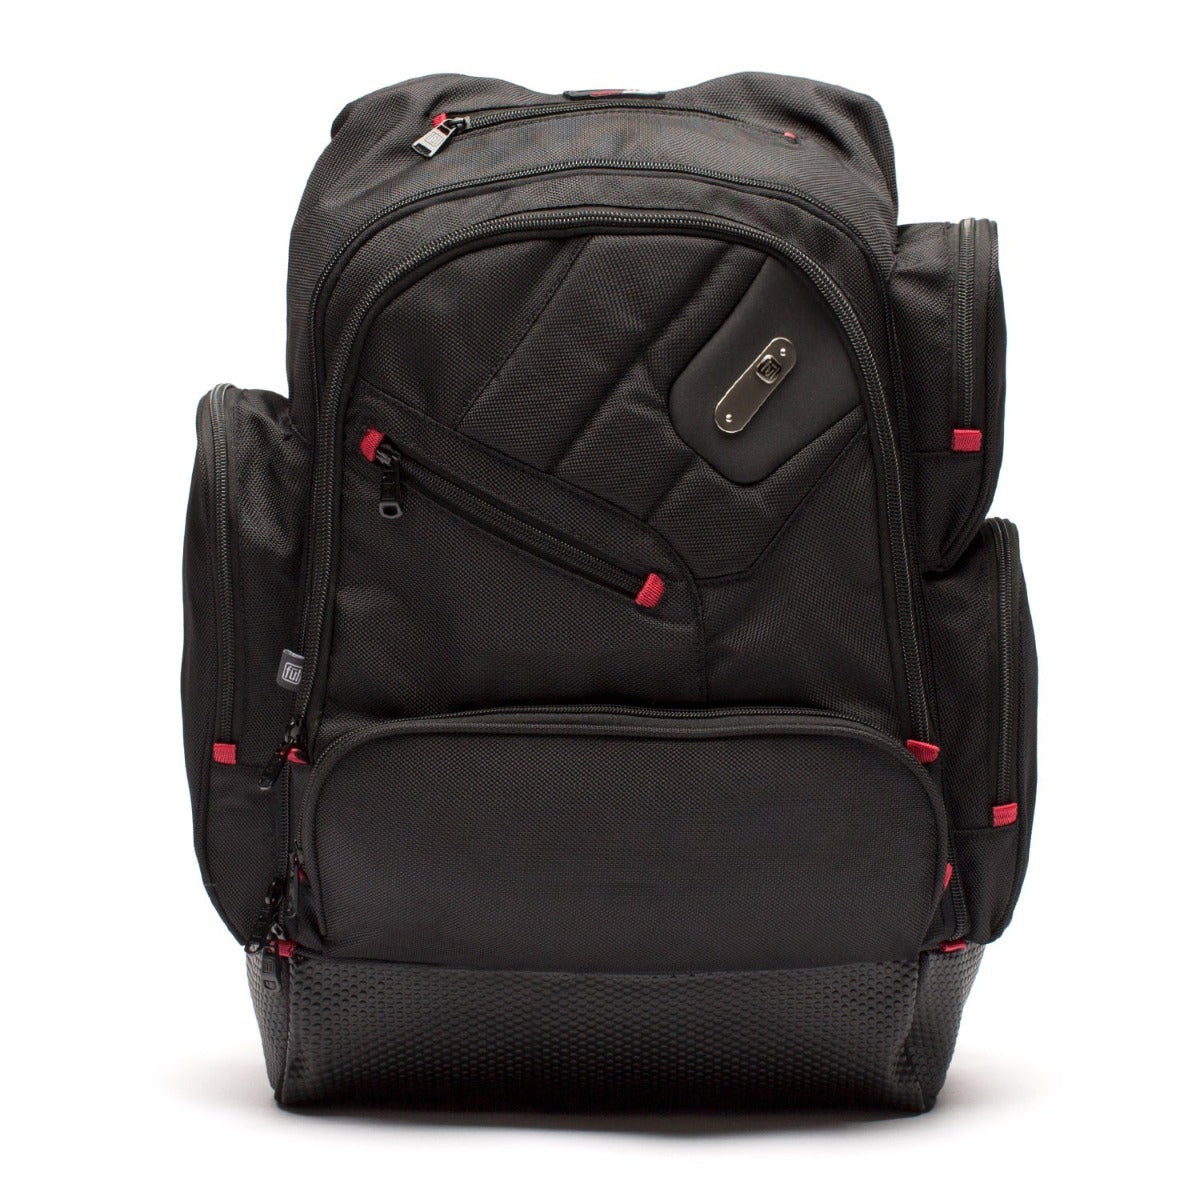 FIRST LOOK: New Disney Decades 2010 'Star Wars' Backpack